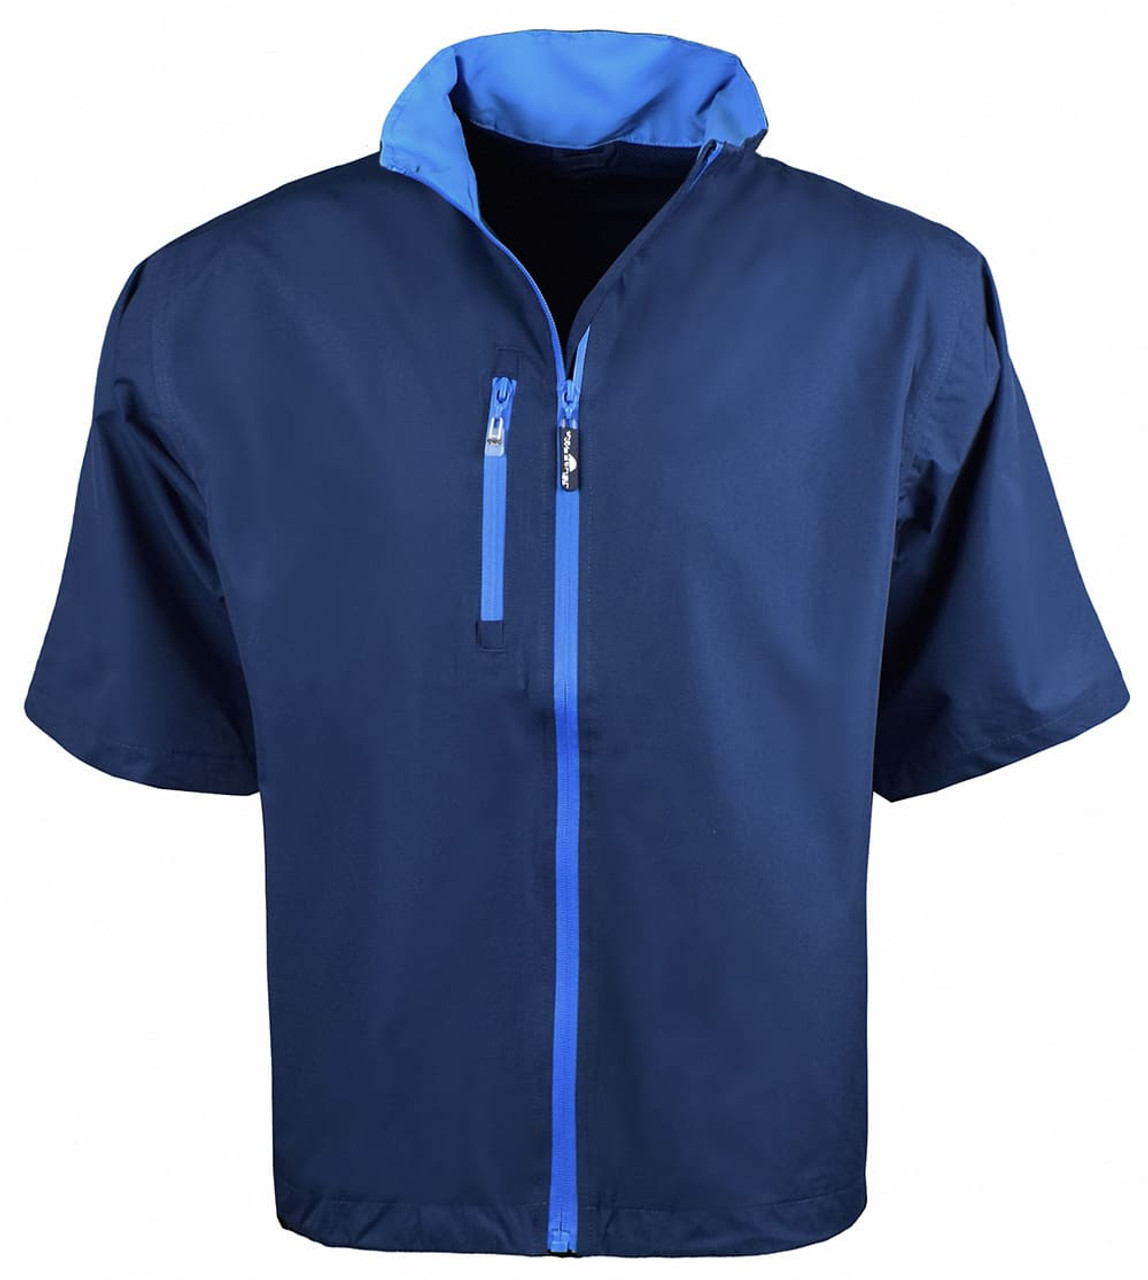 The Weather Company Golf SS Waterproof Jacket